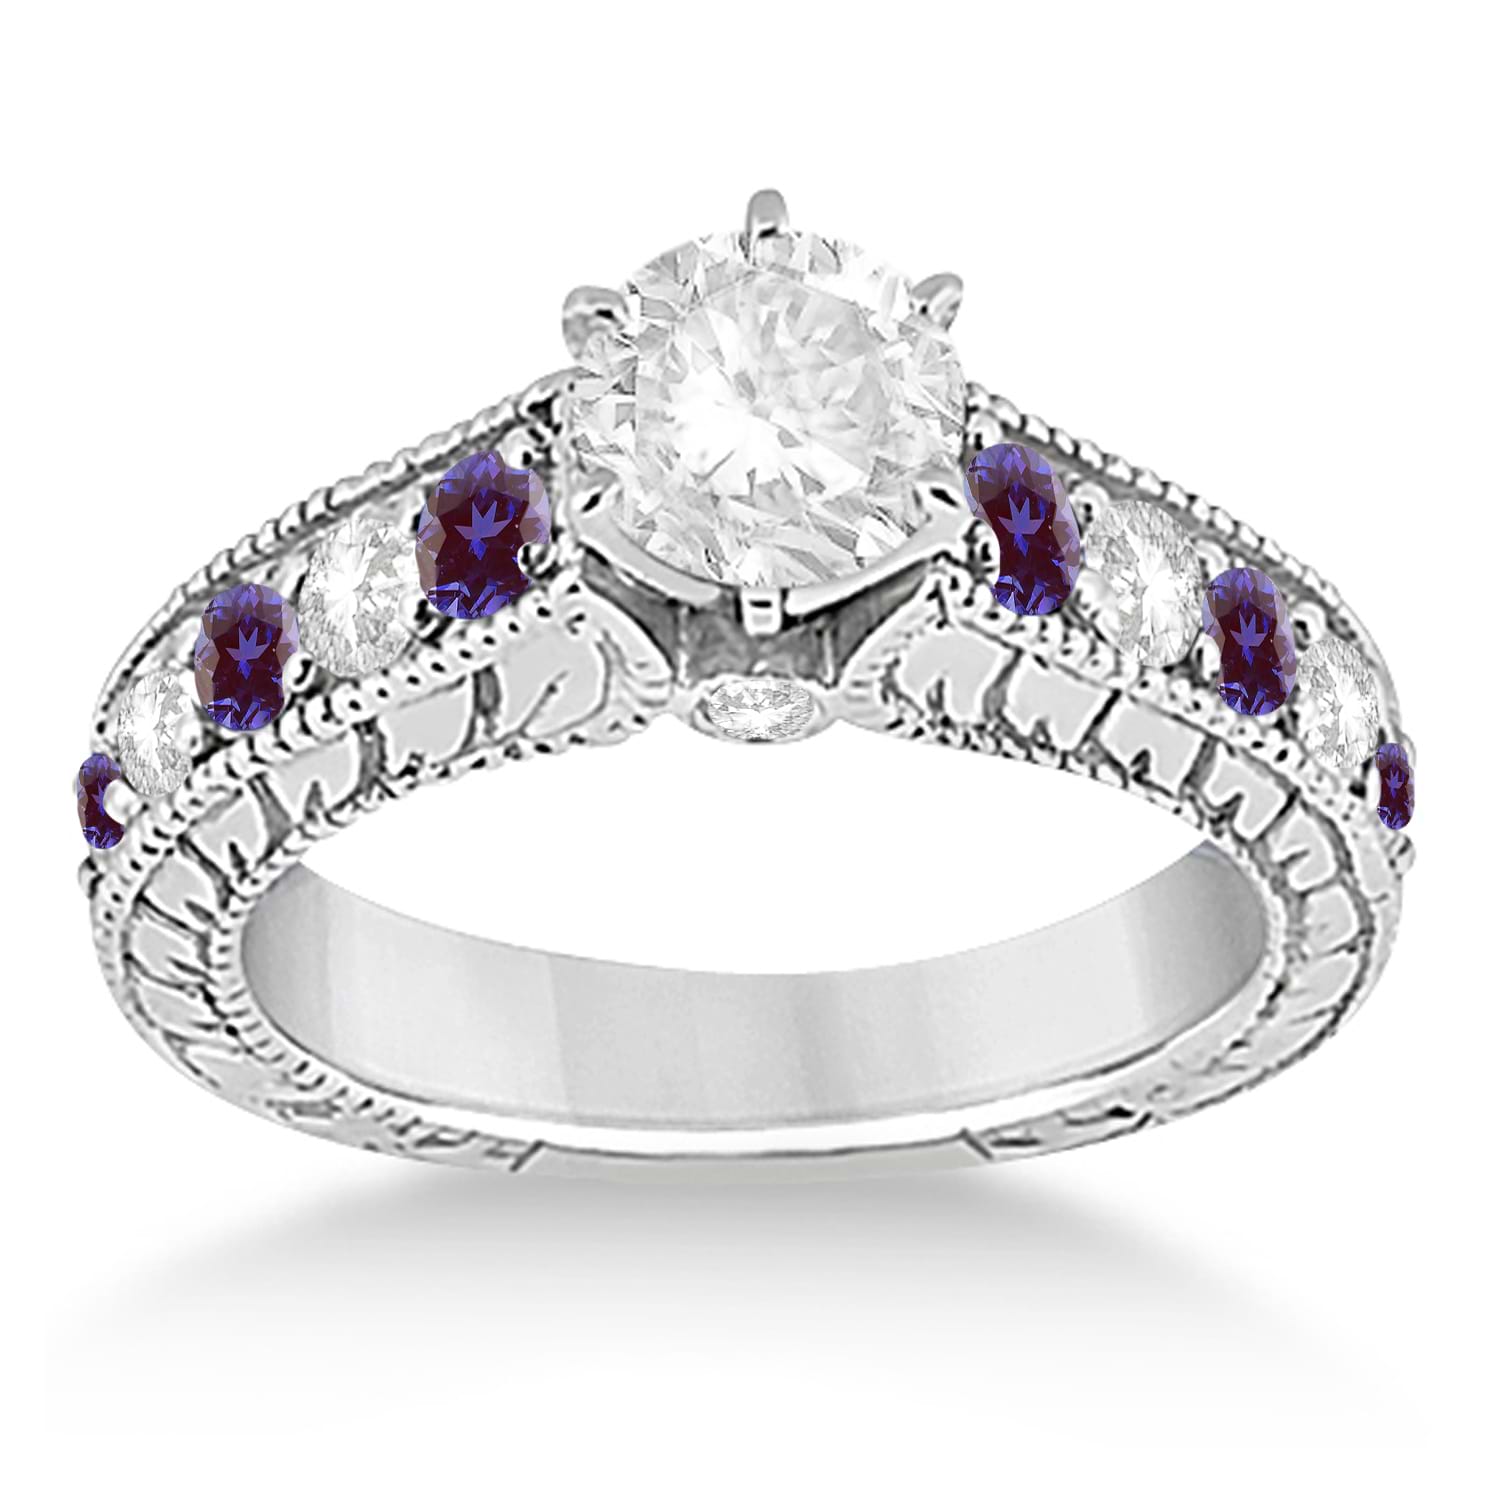 Vintage Diamond and Lab Alexandrite Engagement Ring 14k White Gold (1.41ct)